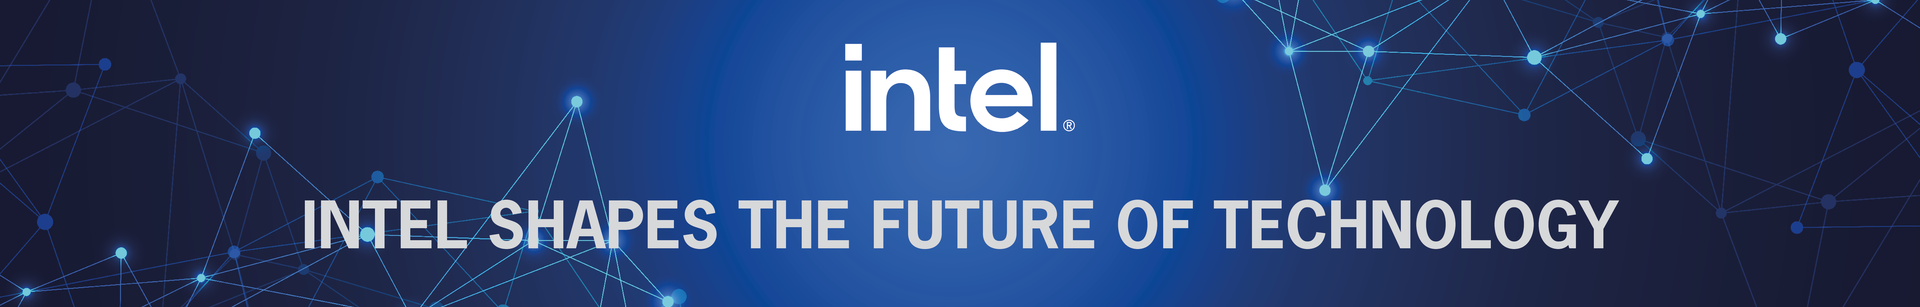 Intel shapes the future of technology